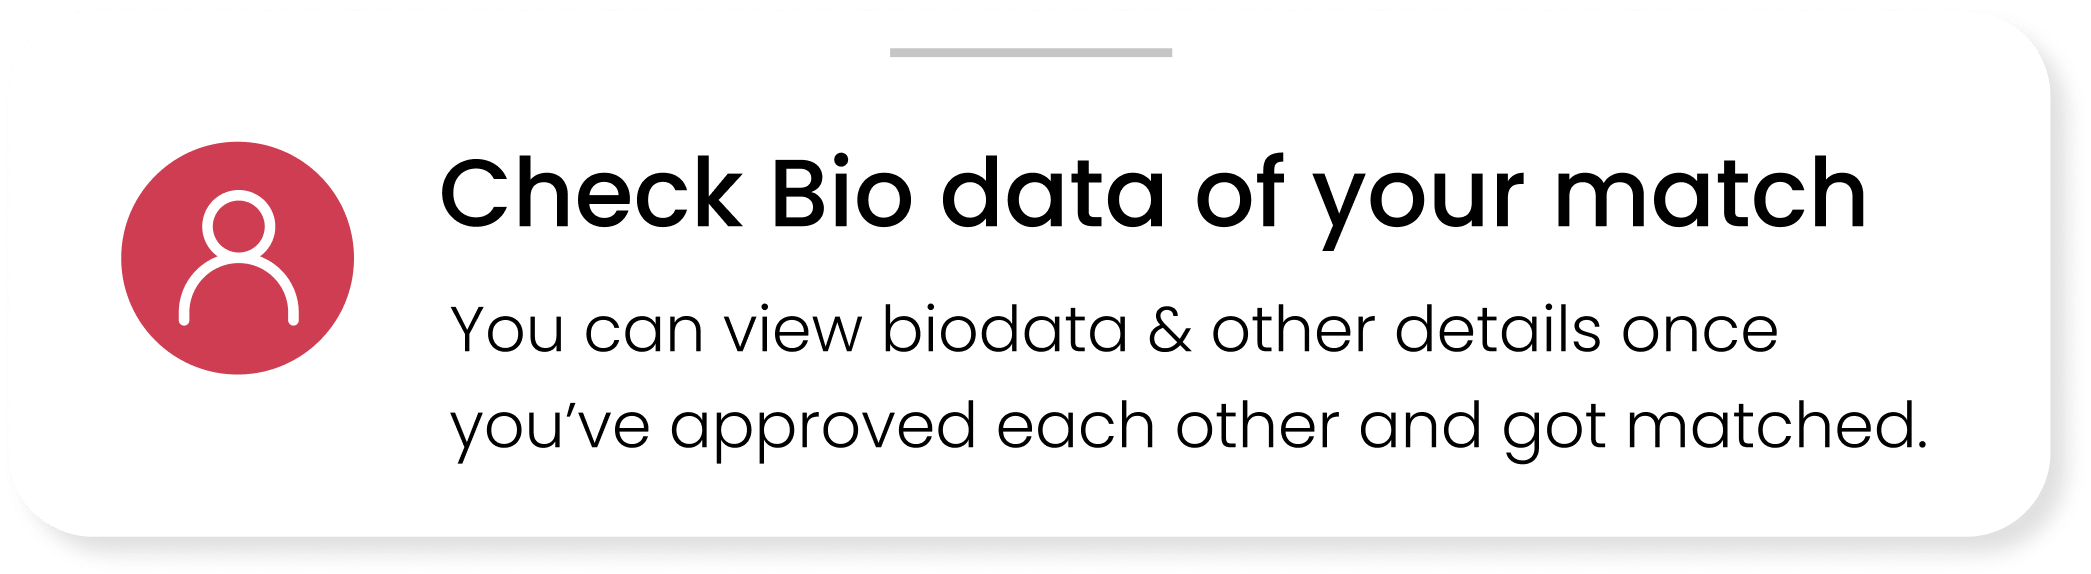 Check Bio Data Of Your Match Feature